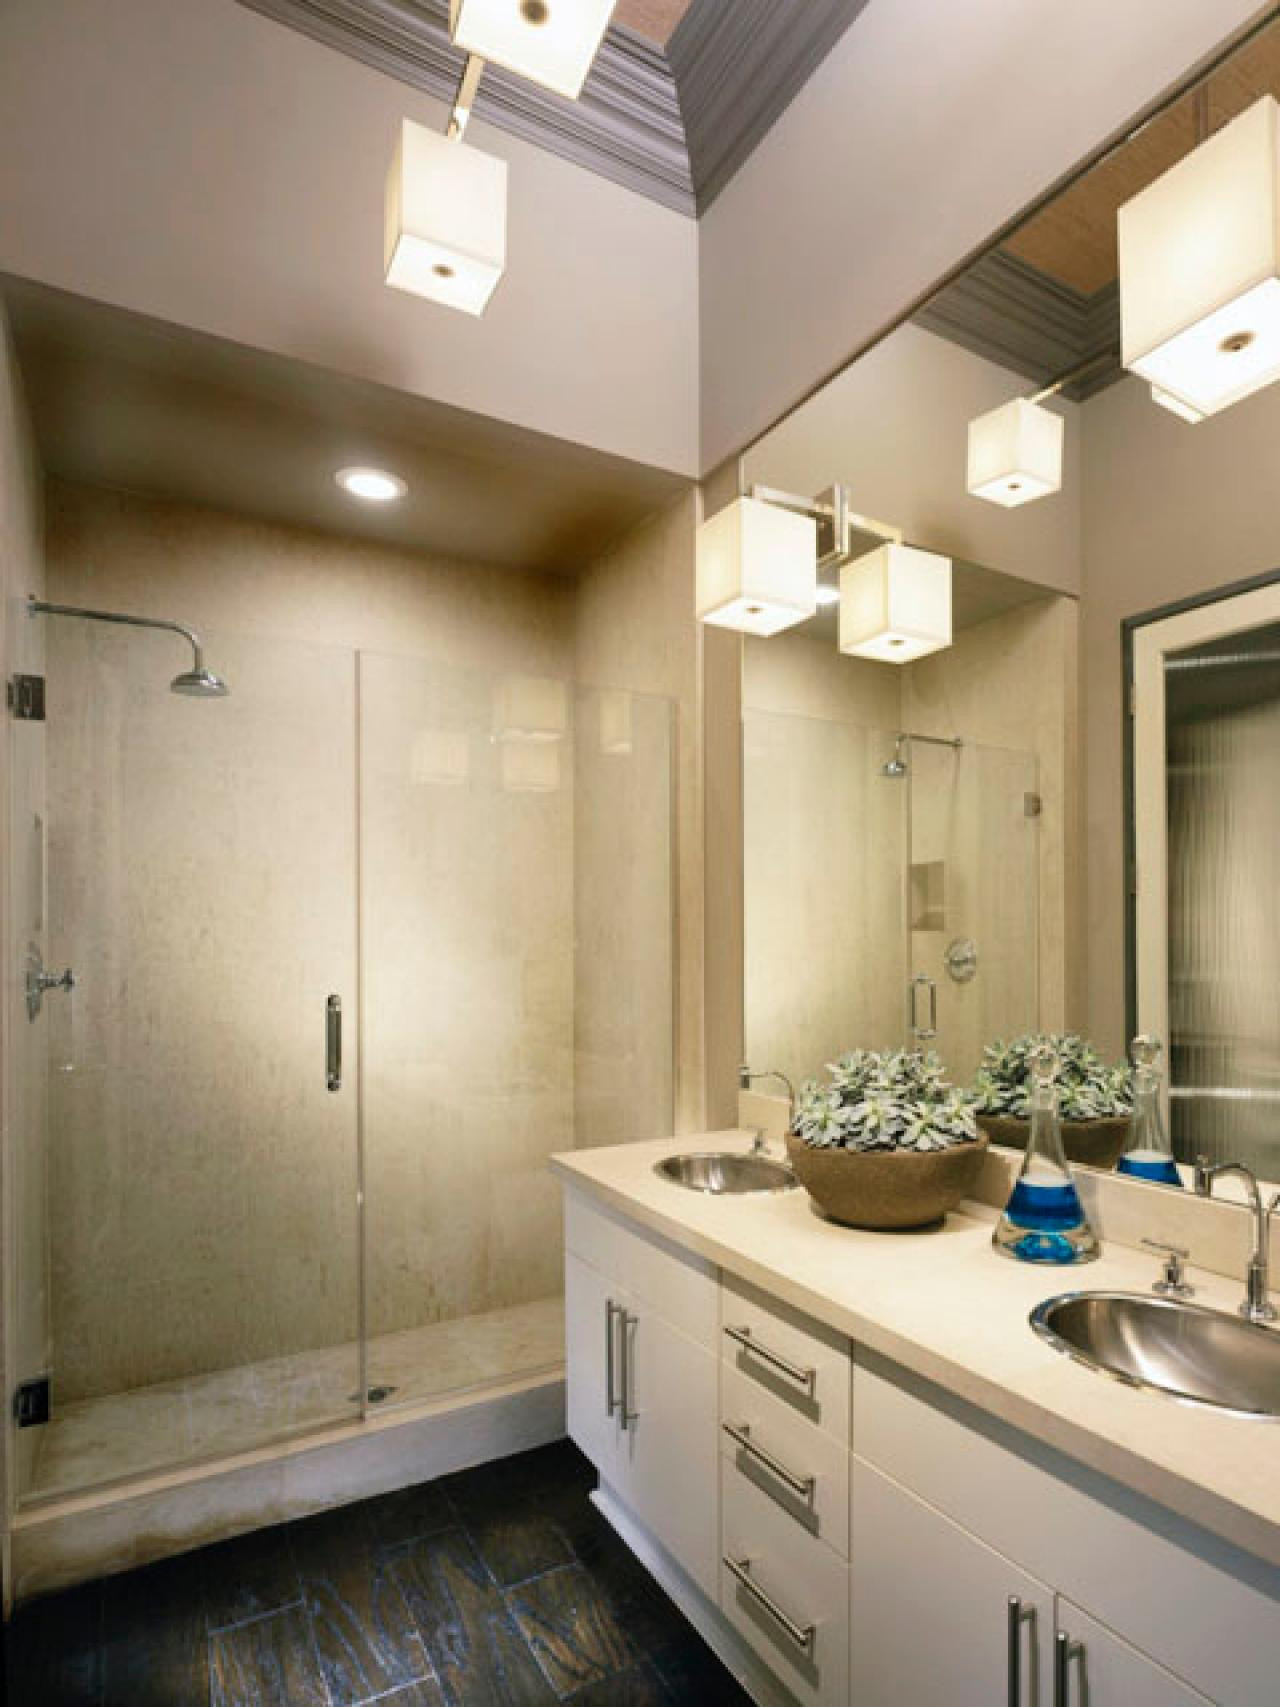 Bathroom Lighting Design
 Four Types Bathroom Lighting You Need To Know About